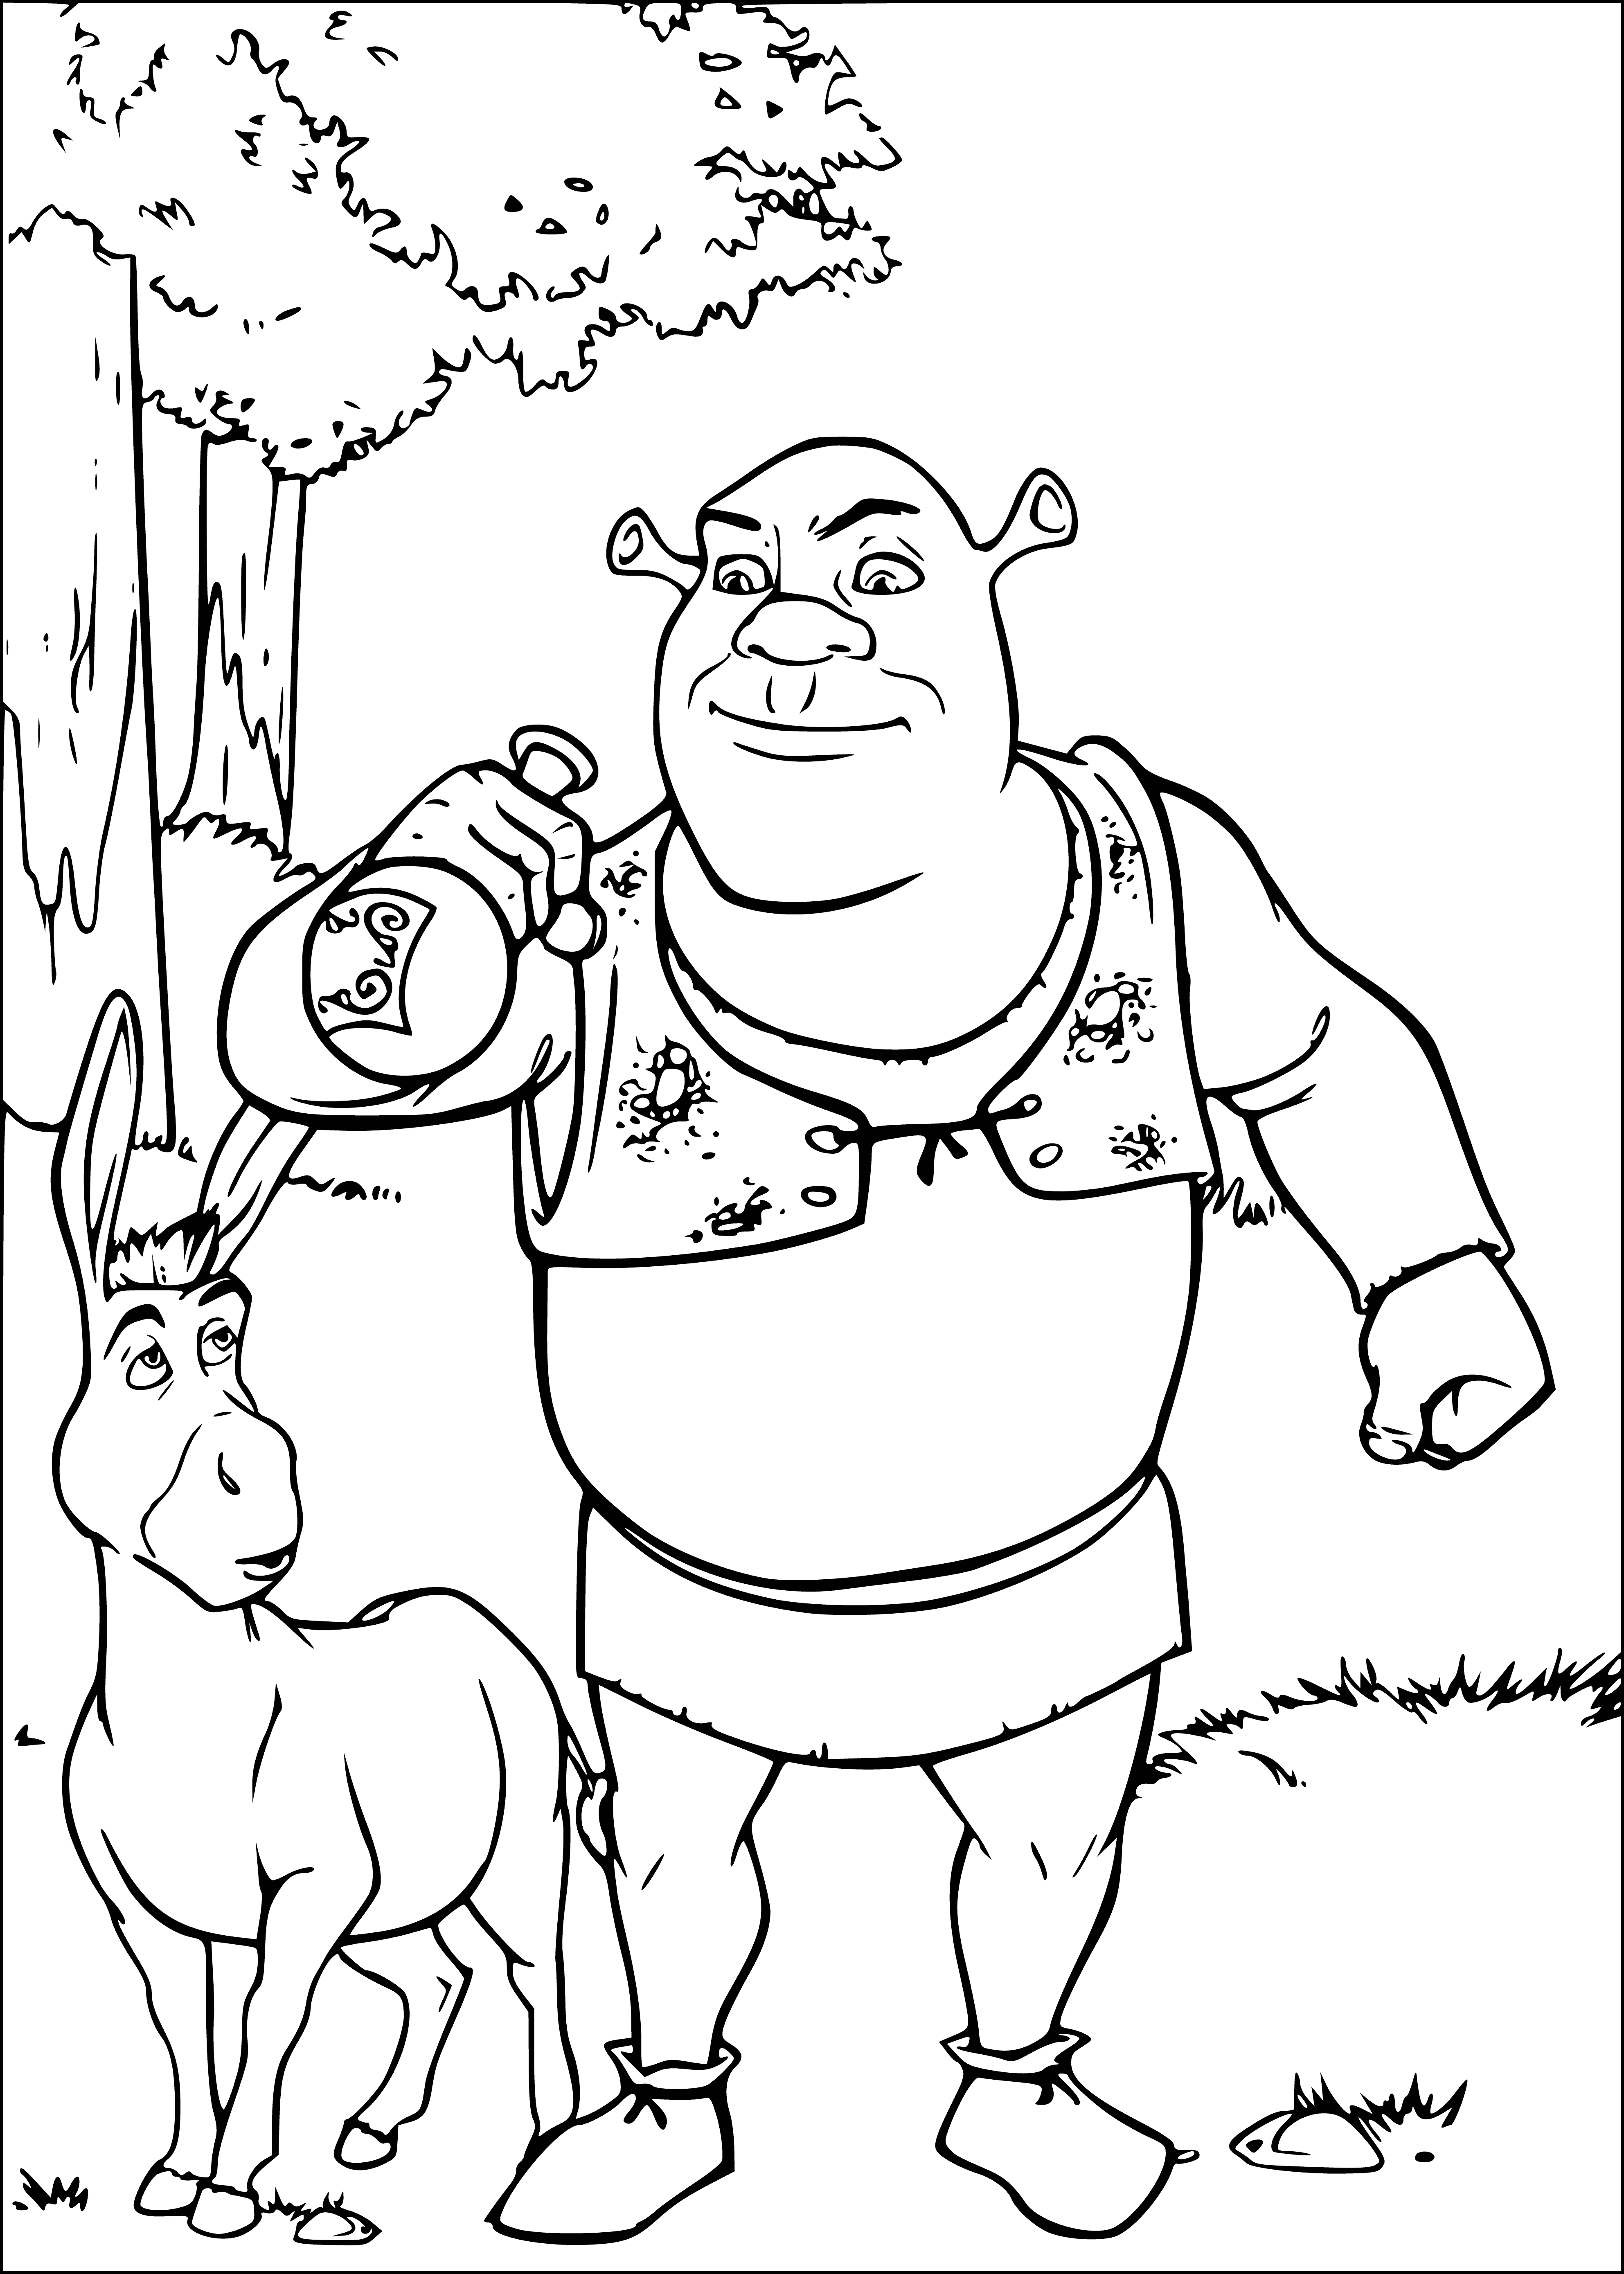 coloring page: Shrek struggles to drink a green, lumpy potion, facing disgust as sweat builds on his forehead.